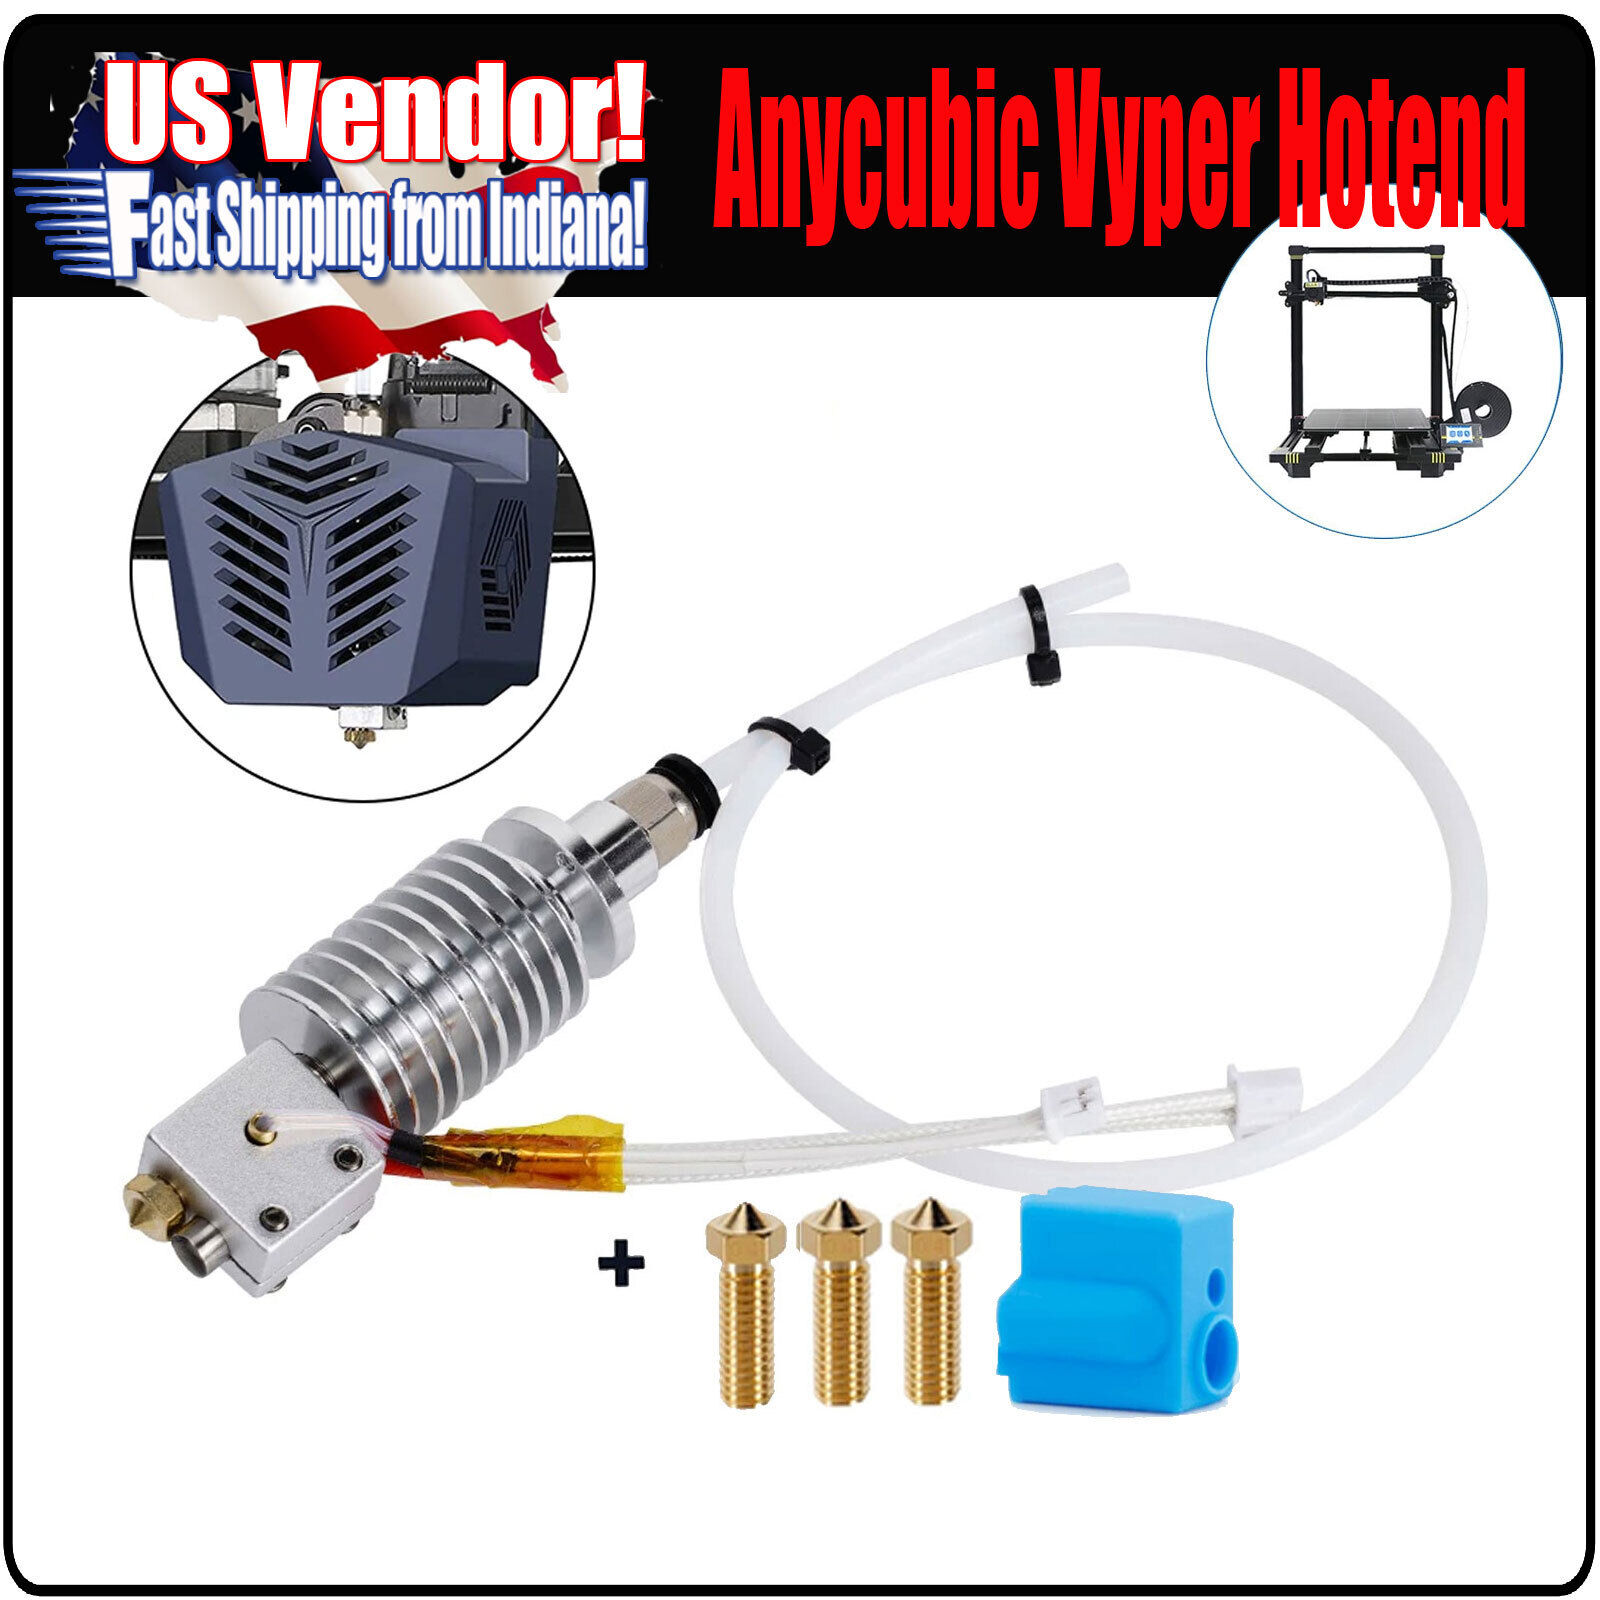 Anycubic Hotend, Vyper Hotend, 3x Nozzle, Silicone Sock, Vyper 3D Printer Hotend